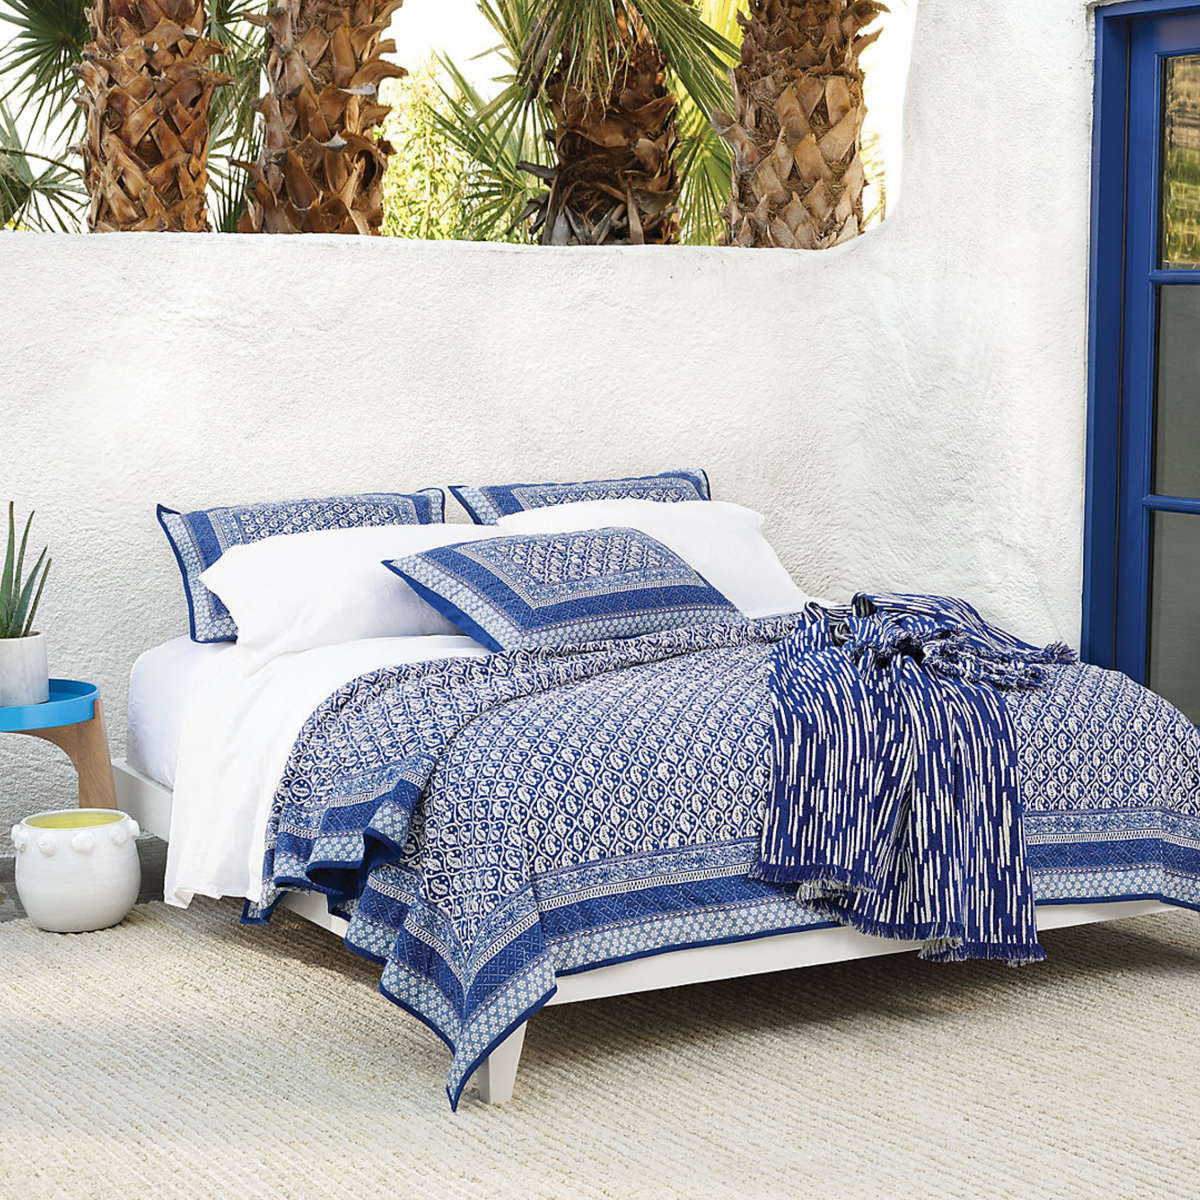 Blue Coordinate with White Pine Cone Hill Lush Linen Bedding